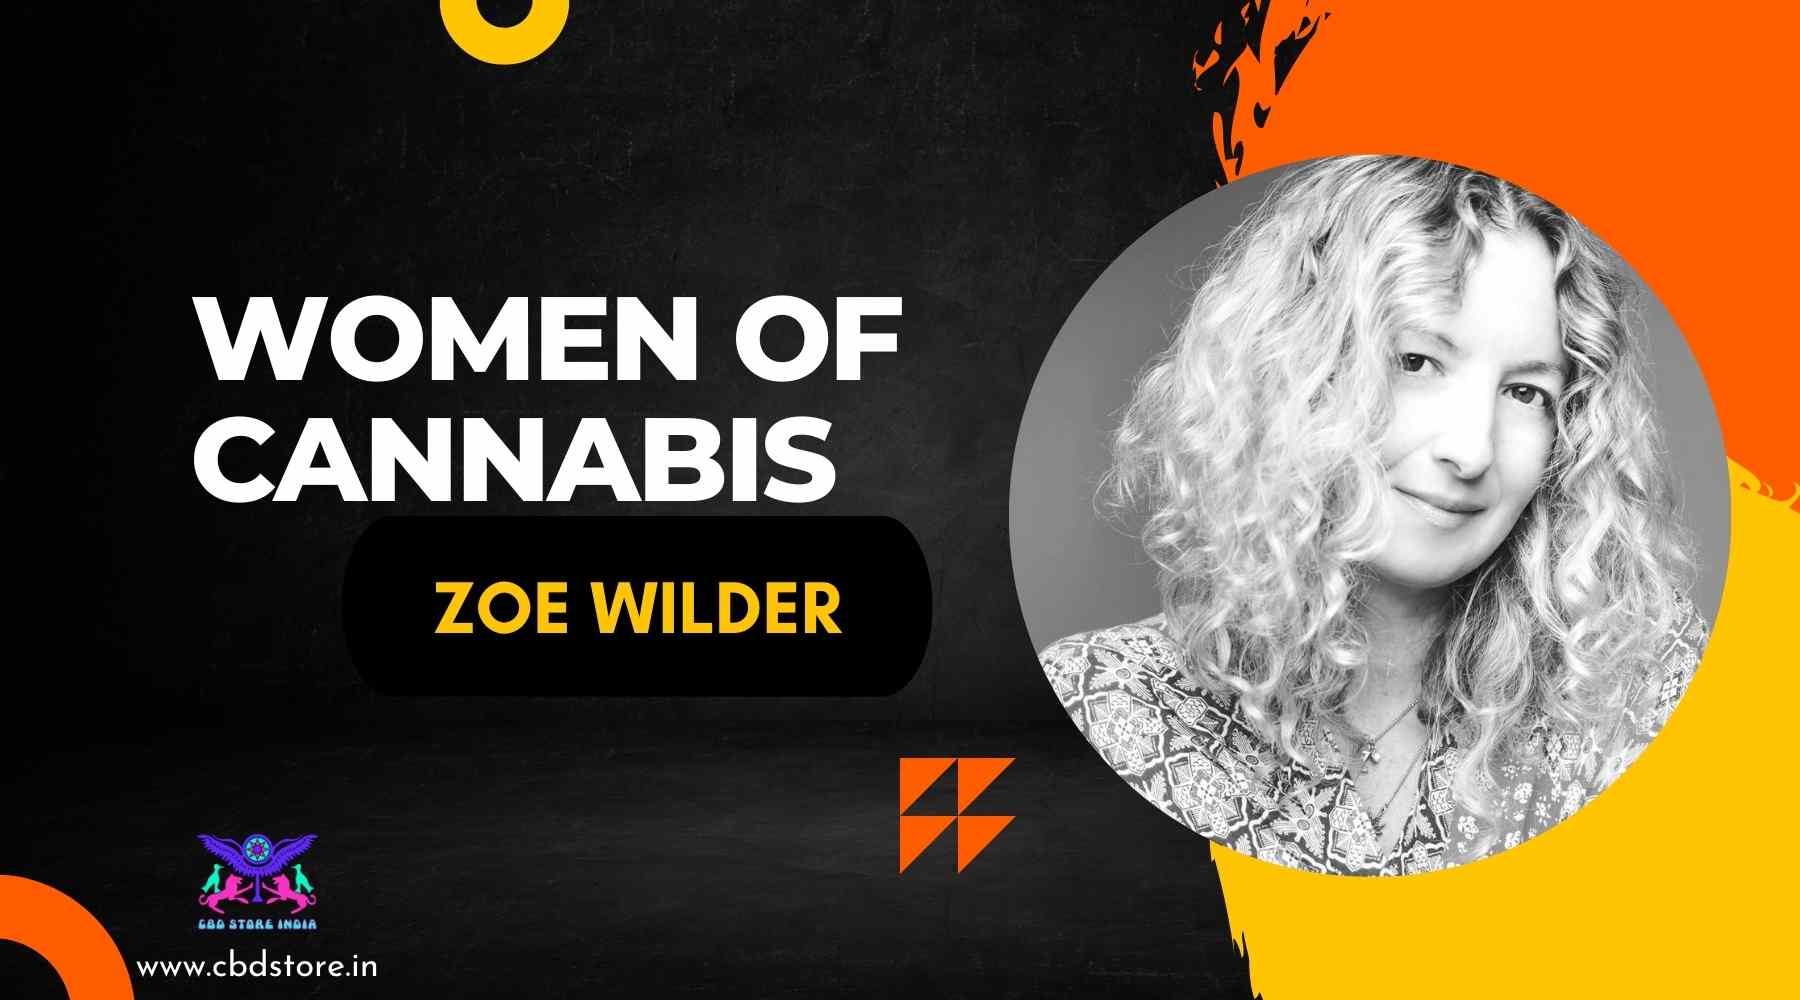 Women of Cannabis: Zoe Wilder has a message for millions - CBD Store India